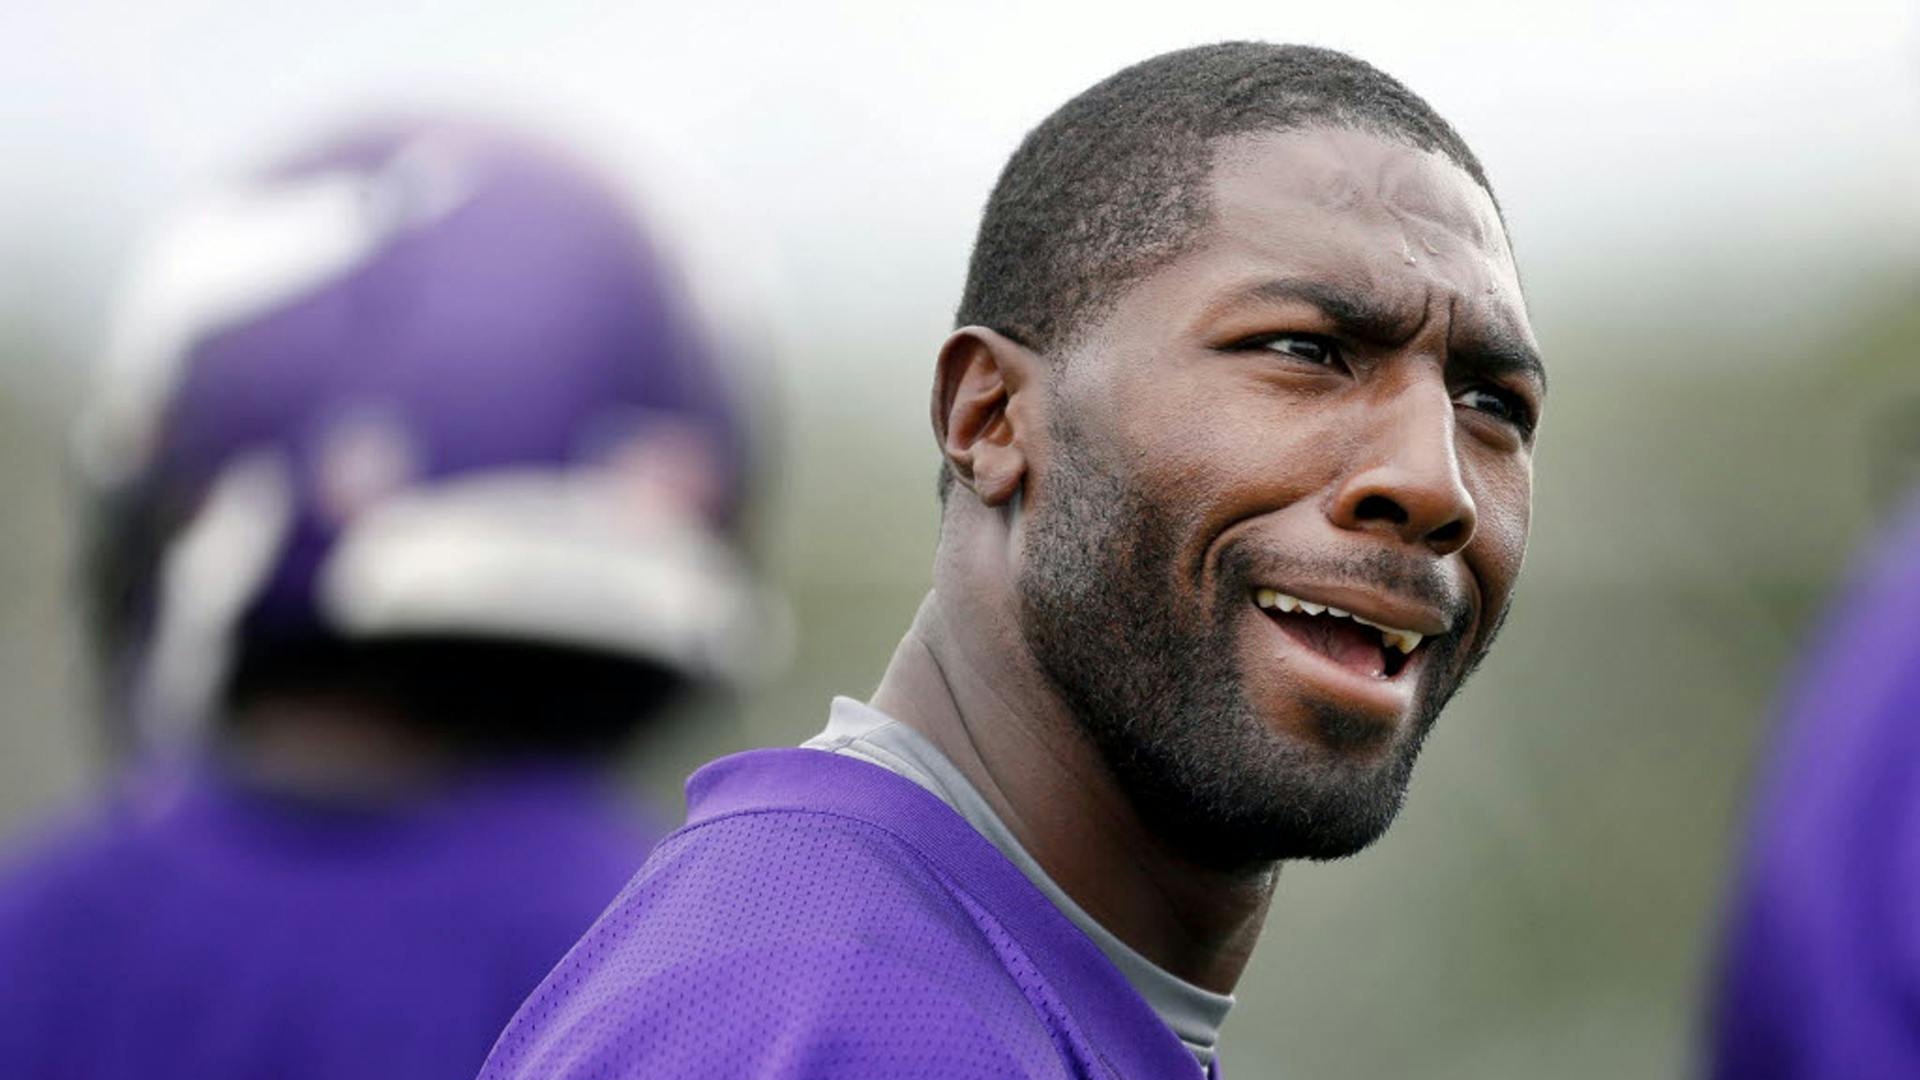 How are former Packers players Greg Jennings and Desmond Bishop getting on during this year's training camp?